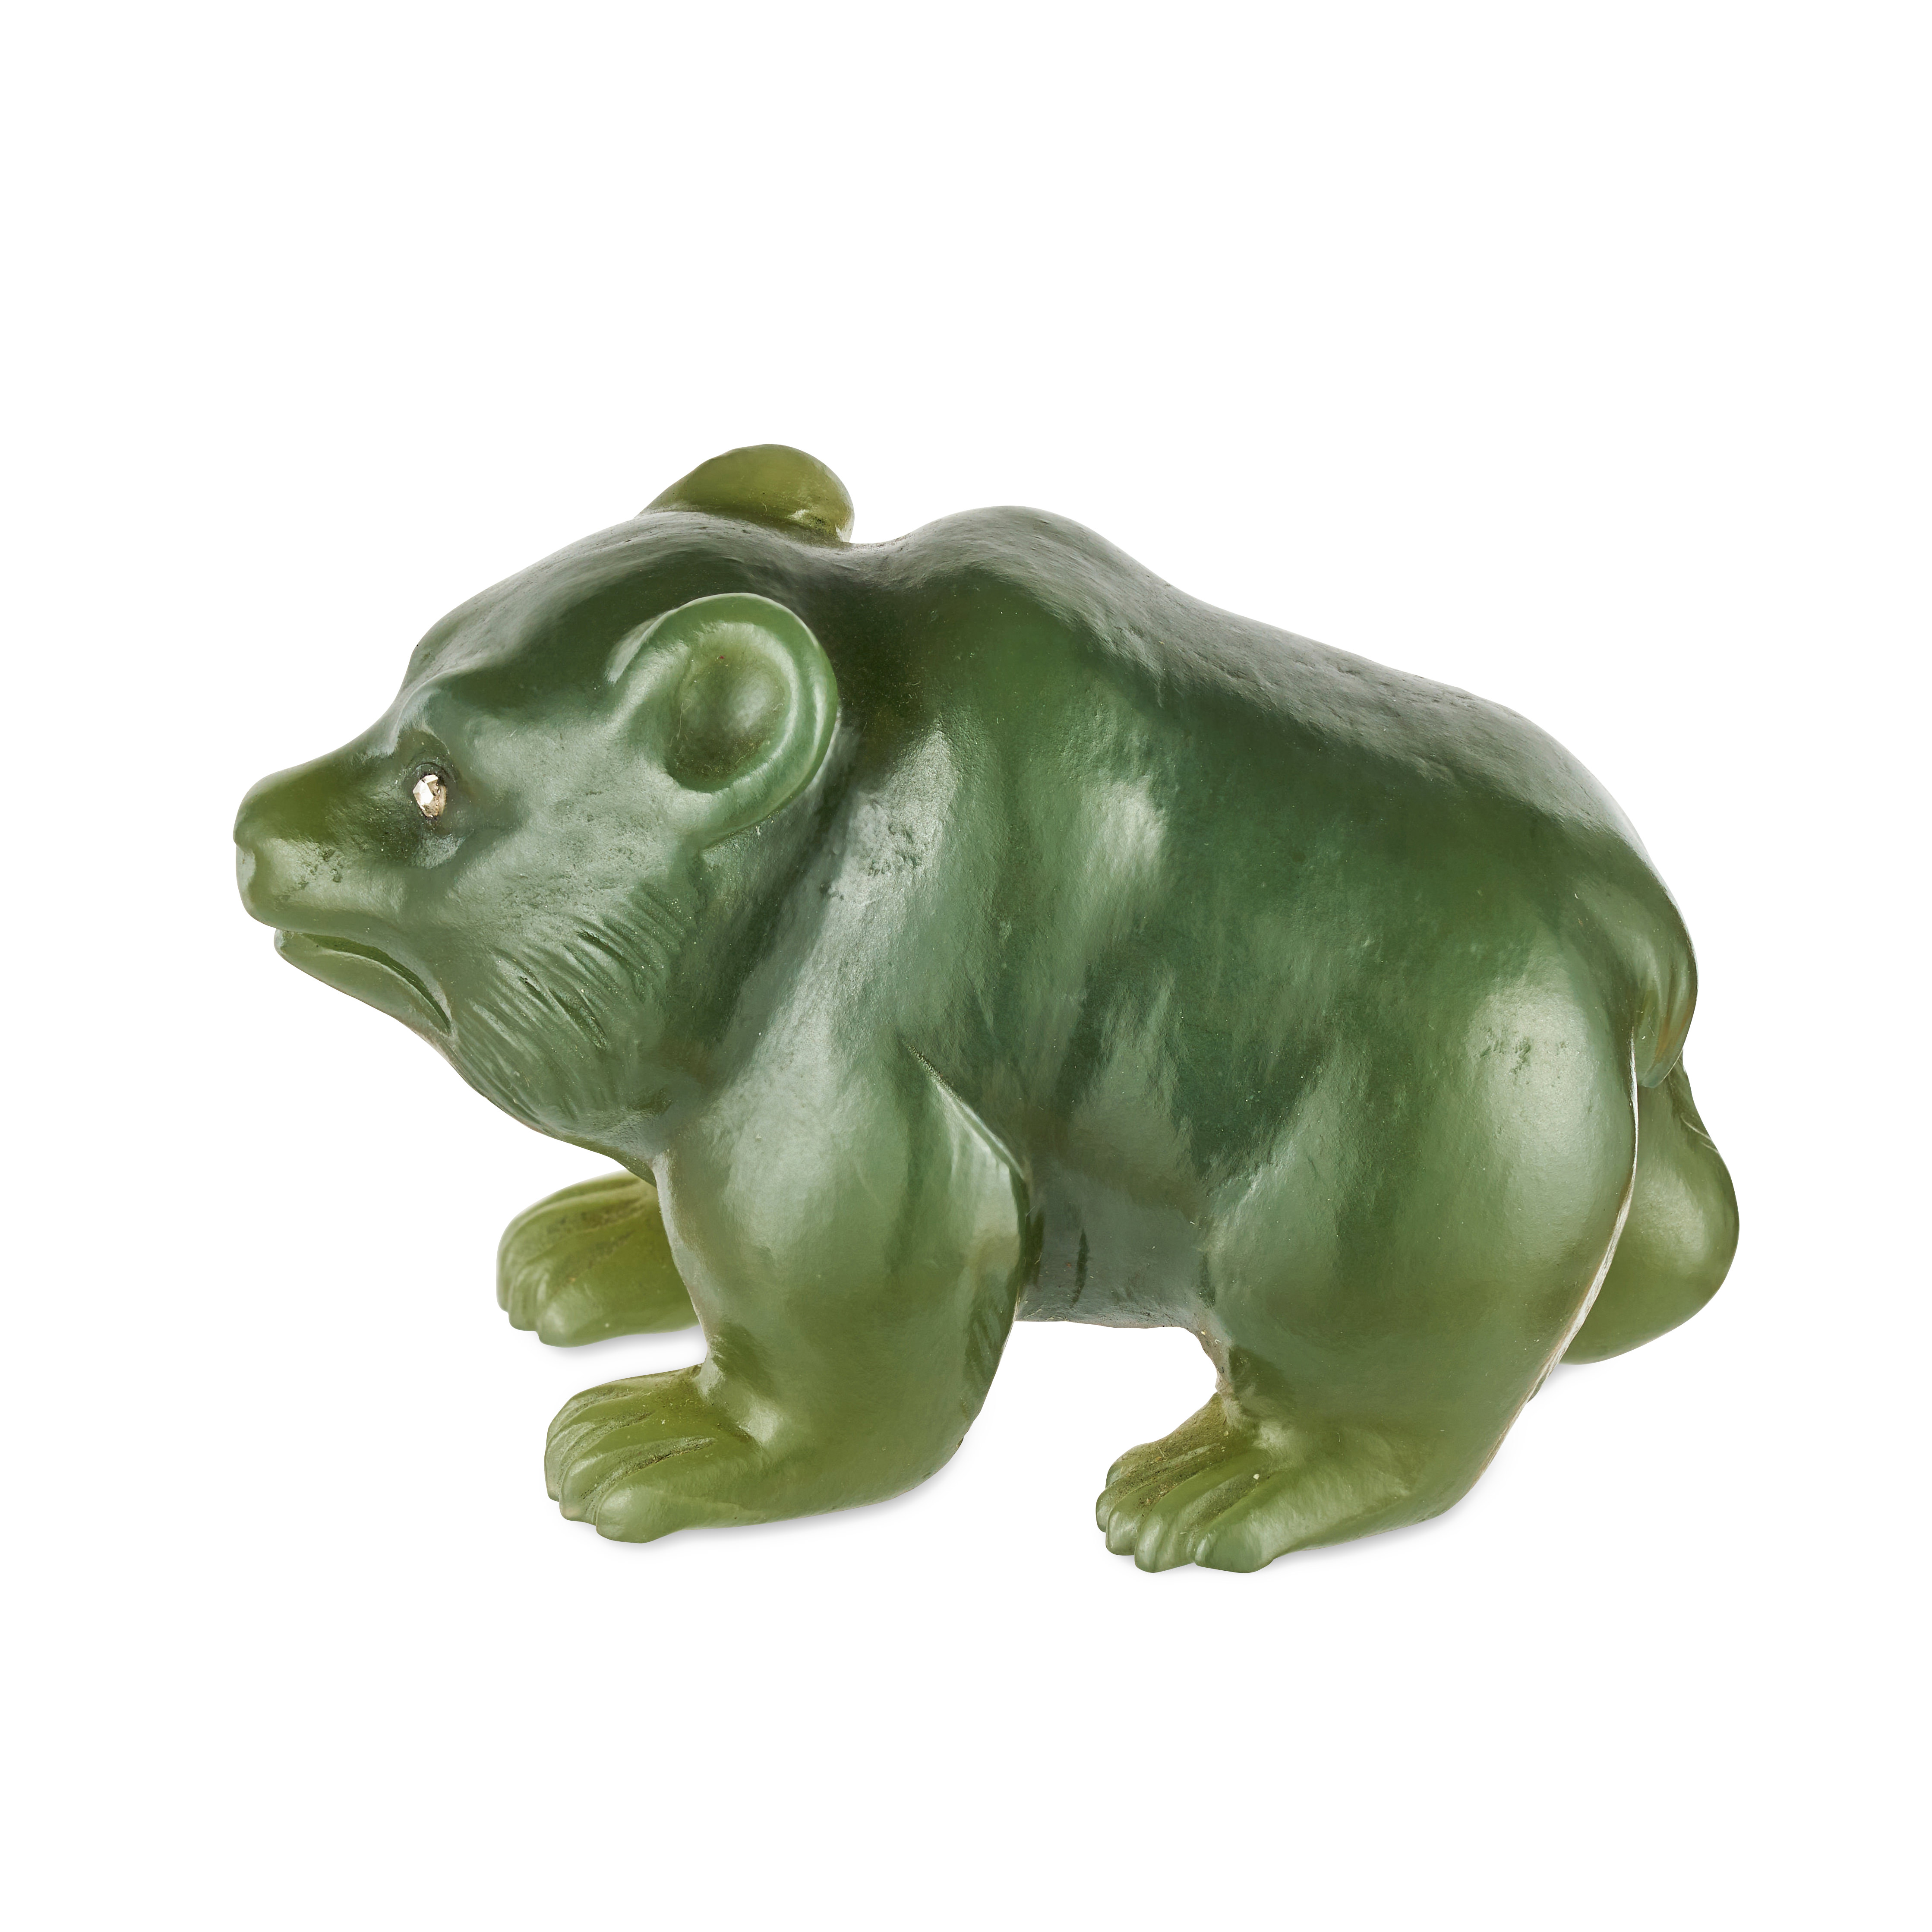 FABERGE, A JEWELLED NEPHRITE STUDY OF A BEAR, CIRCA 1905 - Image 2 of 6